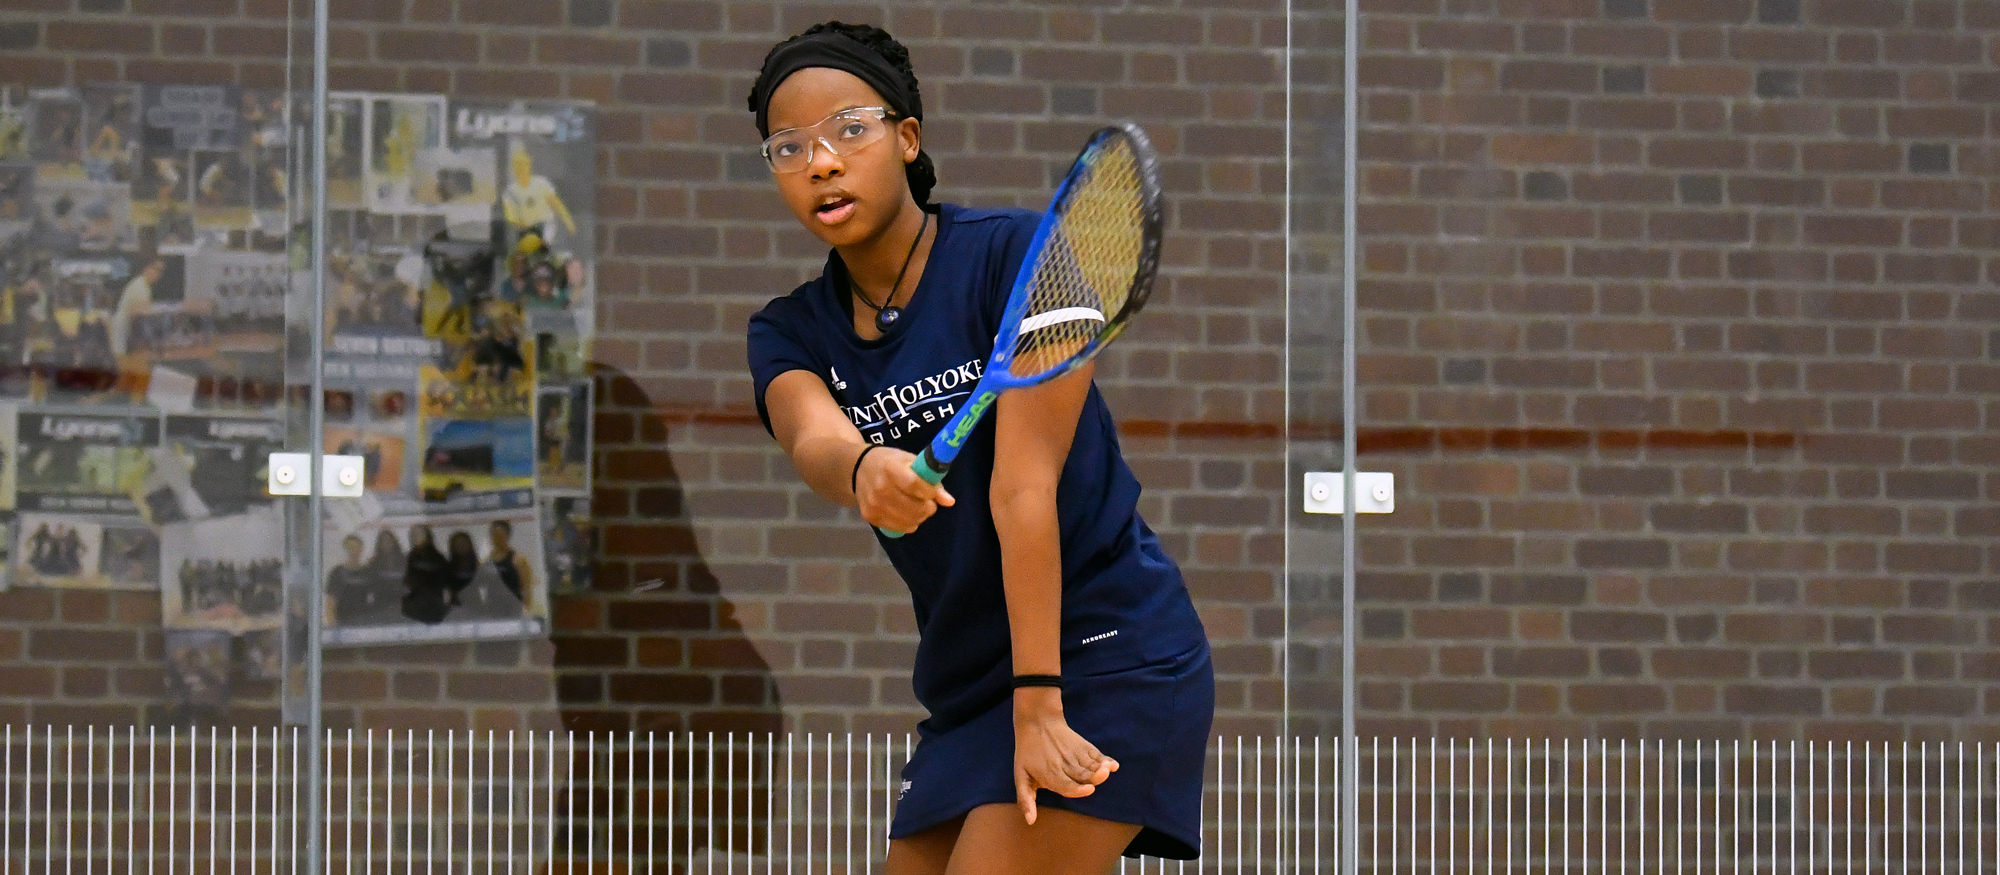 Janiqua Davis scored a 3-1 win over her Brown University opponent on Jan. 14, 2023 at Wesleyan. (RJB Sports file photo)